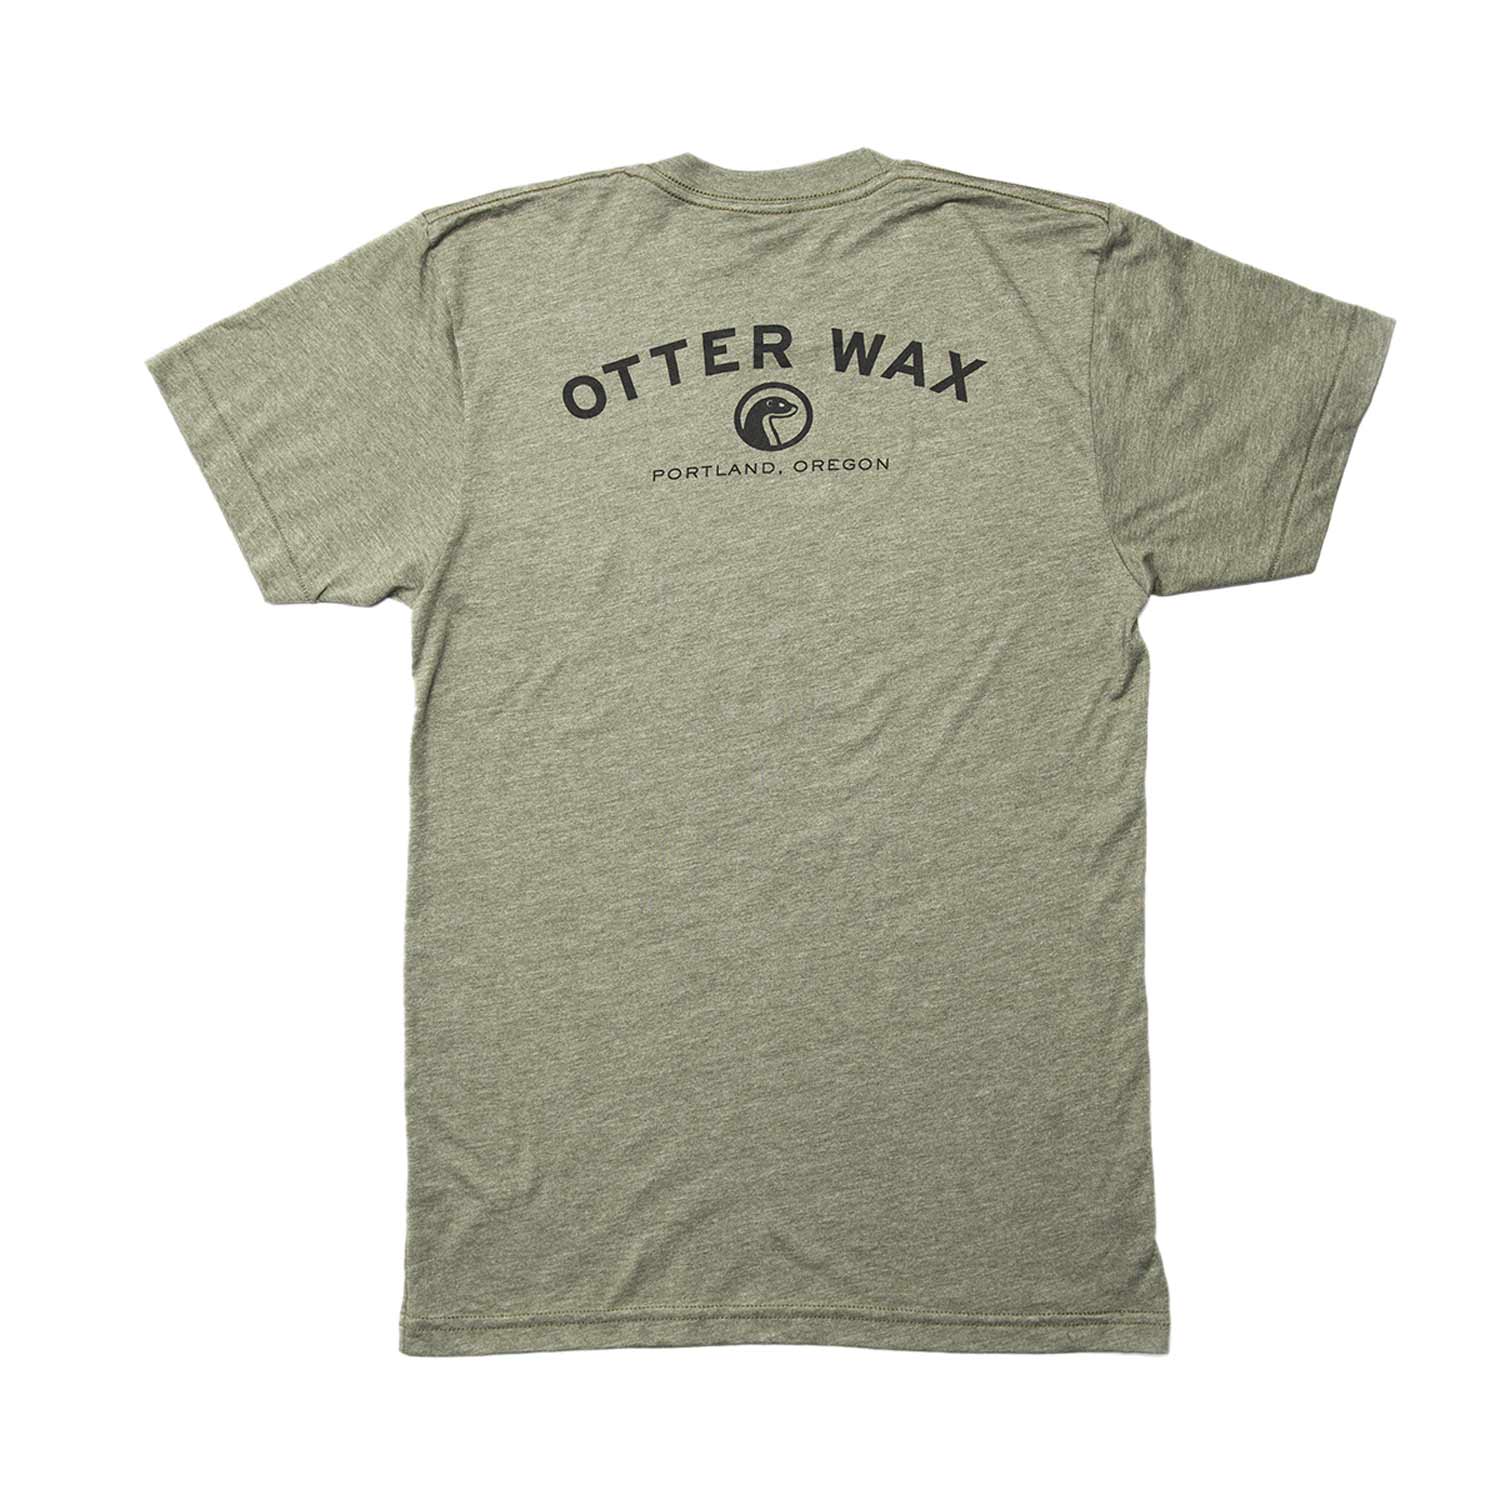 Otter Wax Fitted Cotton Unisex T-Shirt With Black Print Logo Front And Back In Heather Forest Lieutenant Green Color Made In The USA